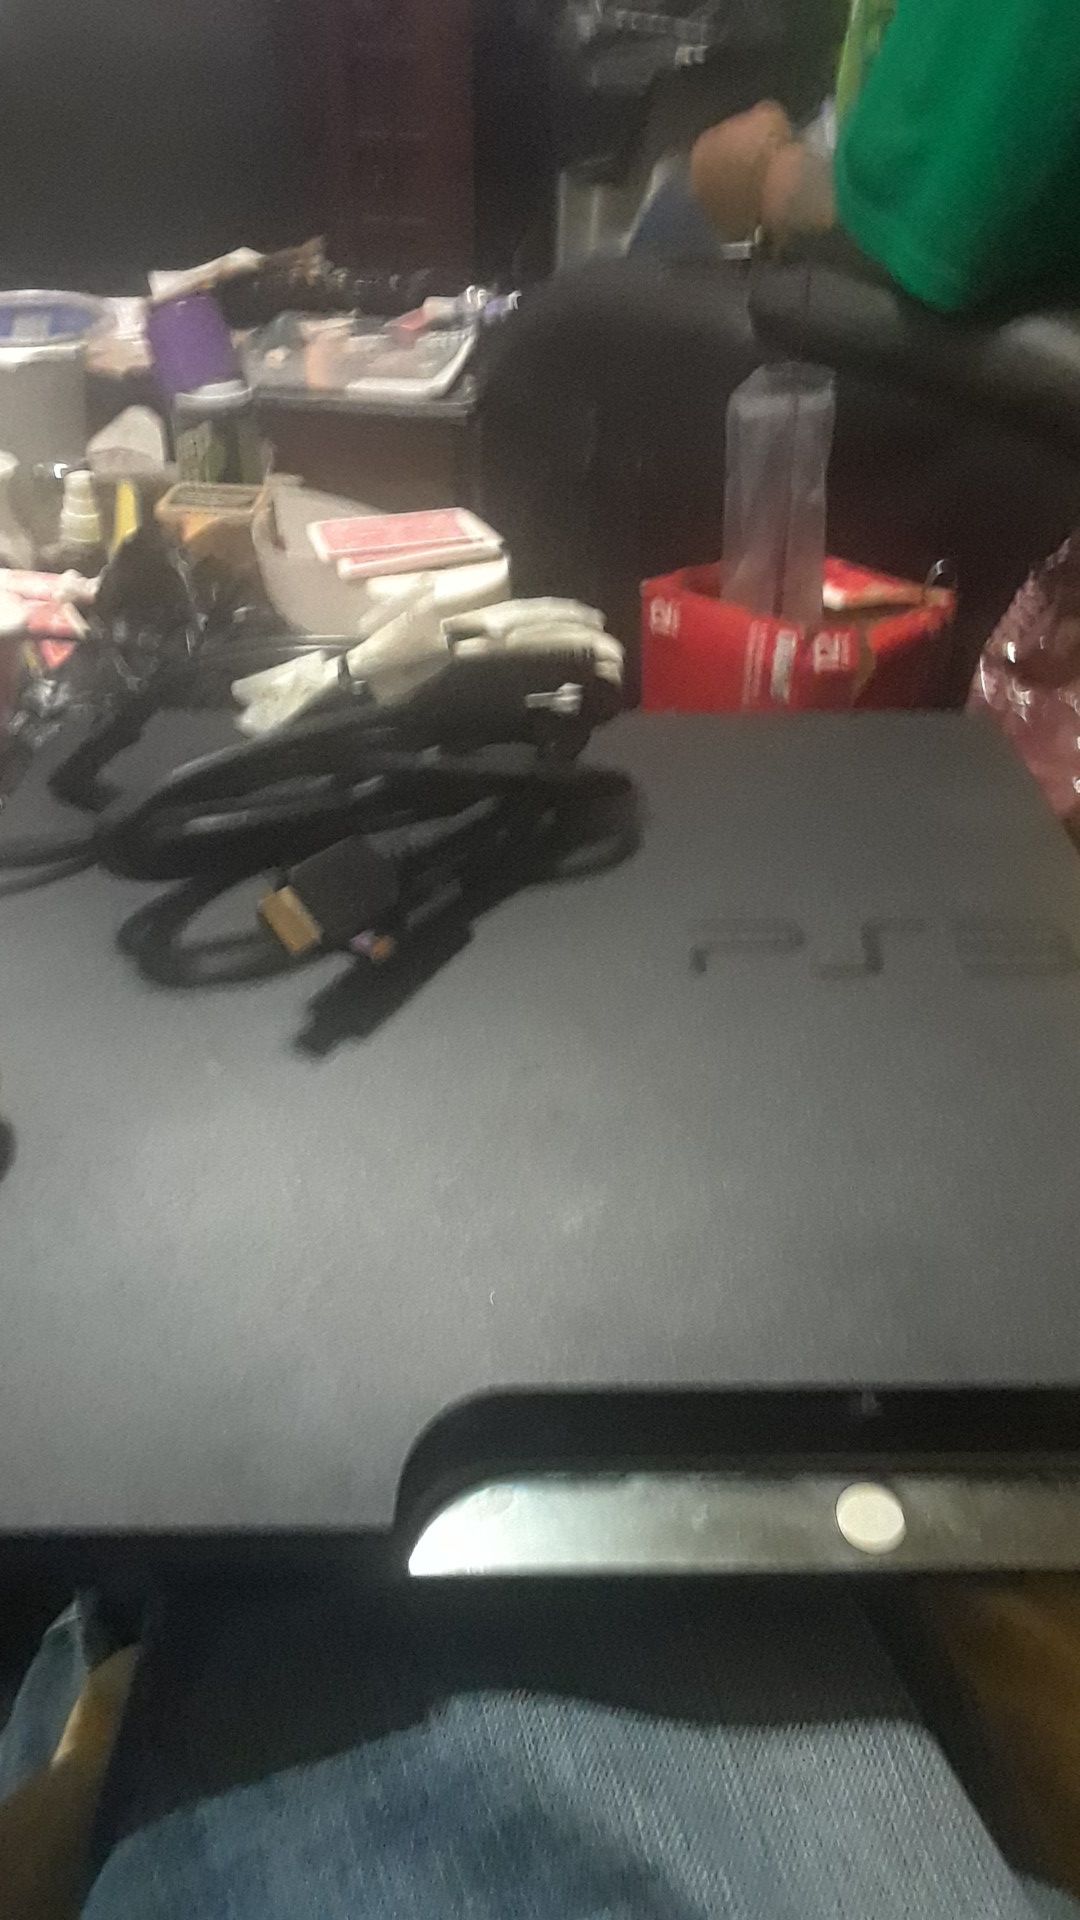 Ps3 in good condition..45$...needs controllers...